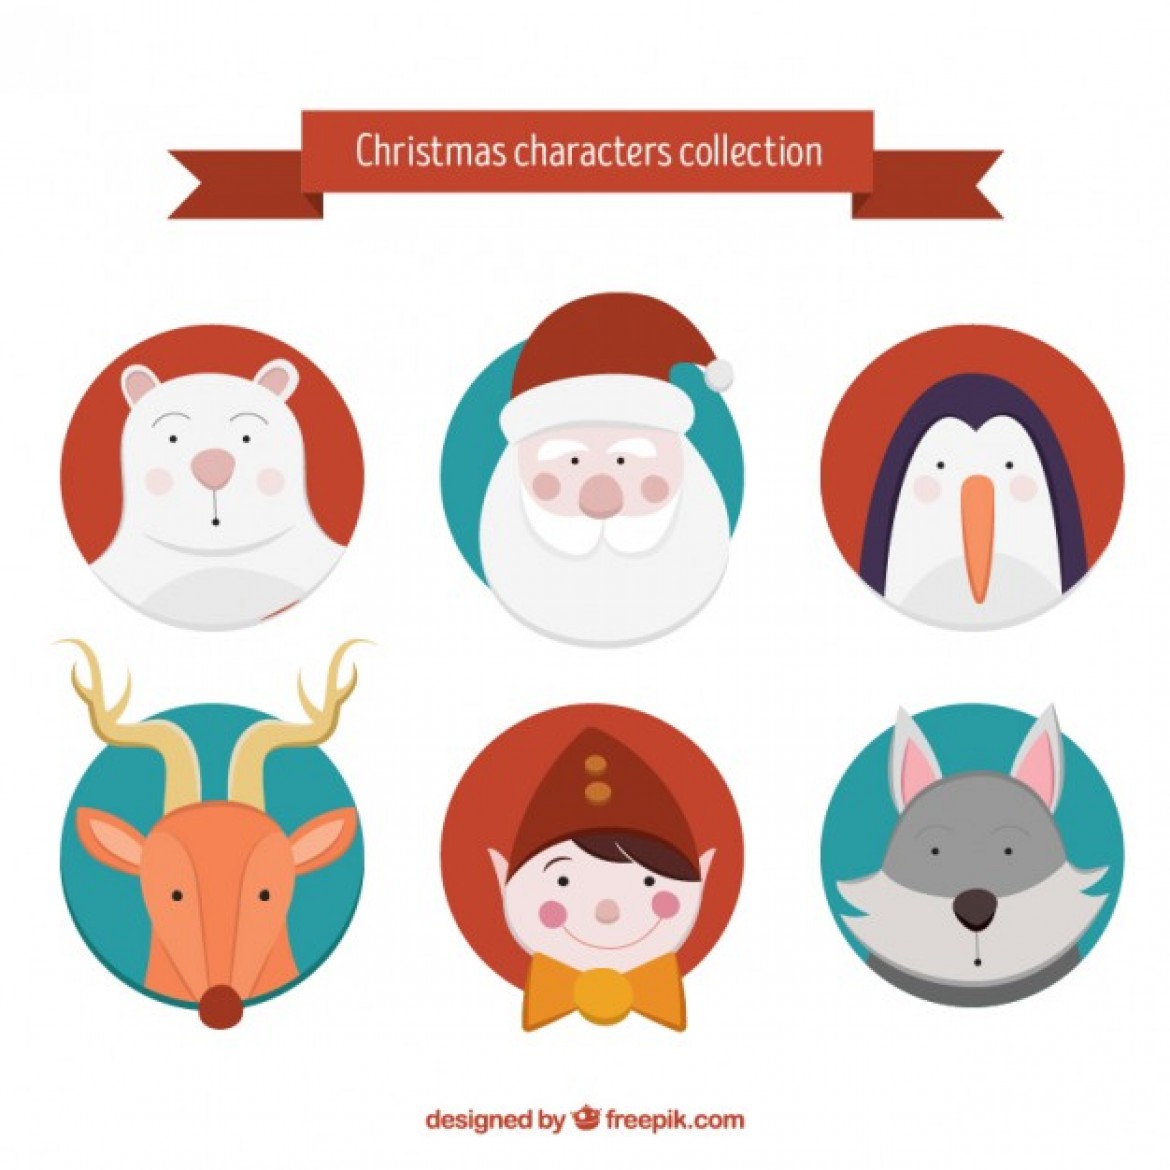 Free vector Christmas characters collection #25269 | My Graphic Hunt